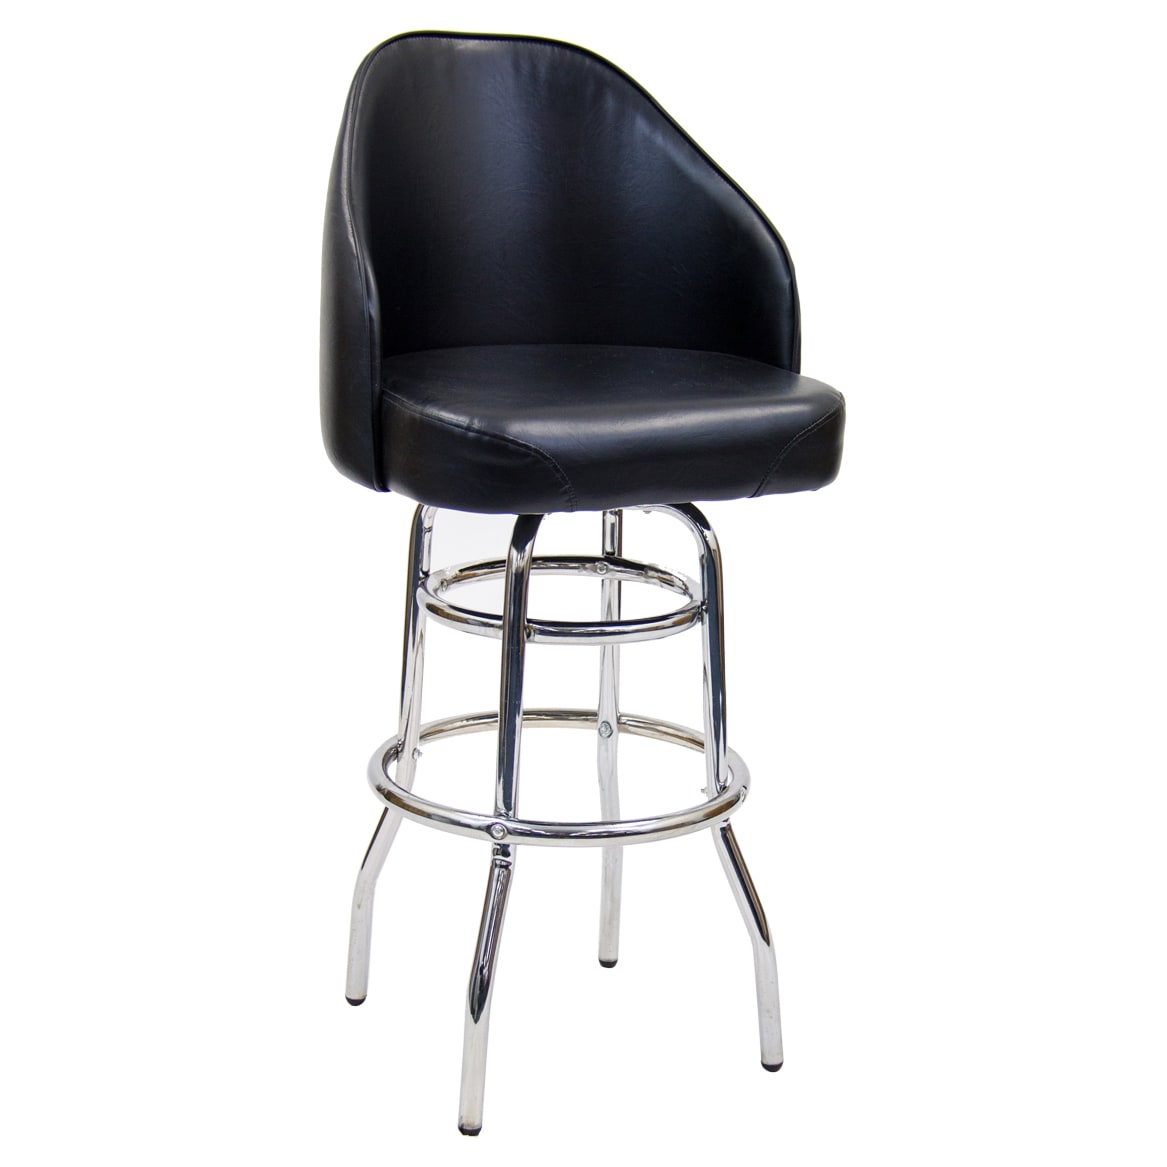 Chrome Swivel With a Double Ring & Extra Large Curved Bucket Seat